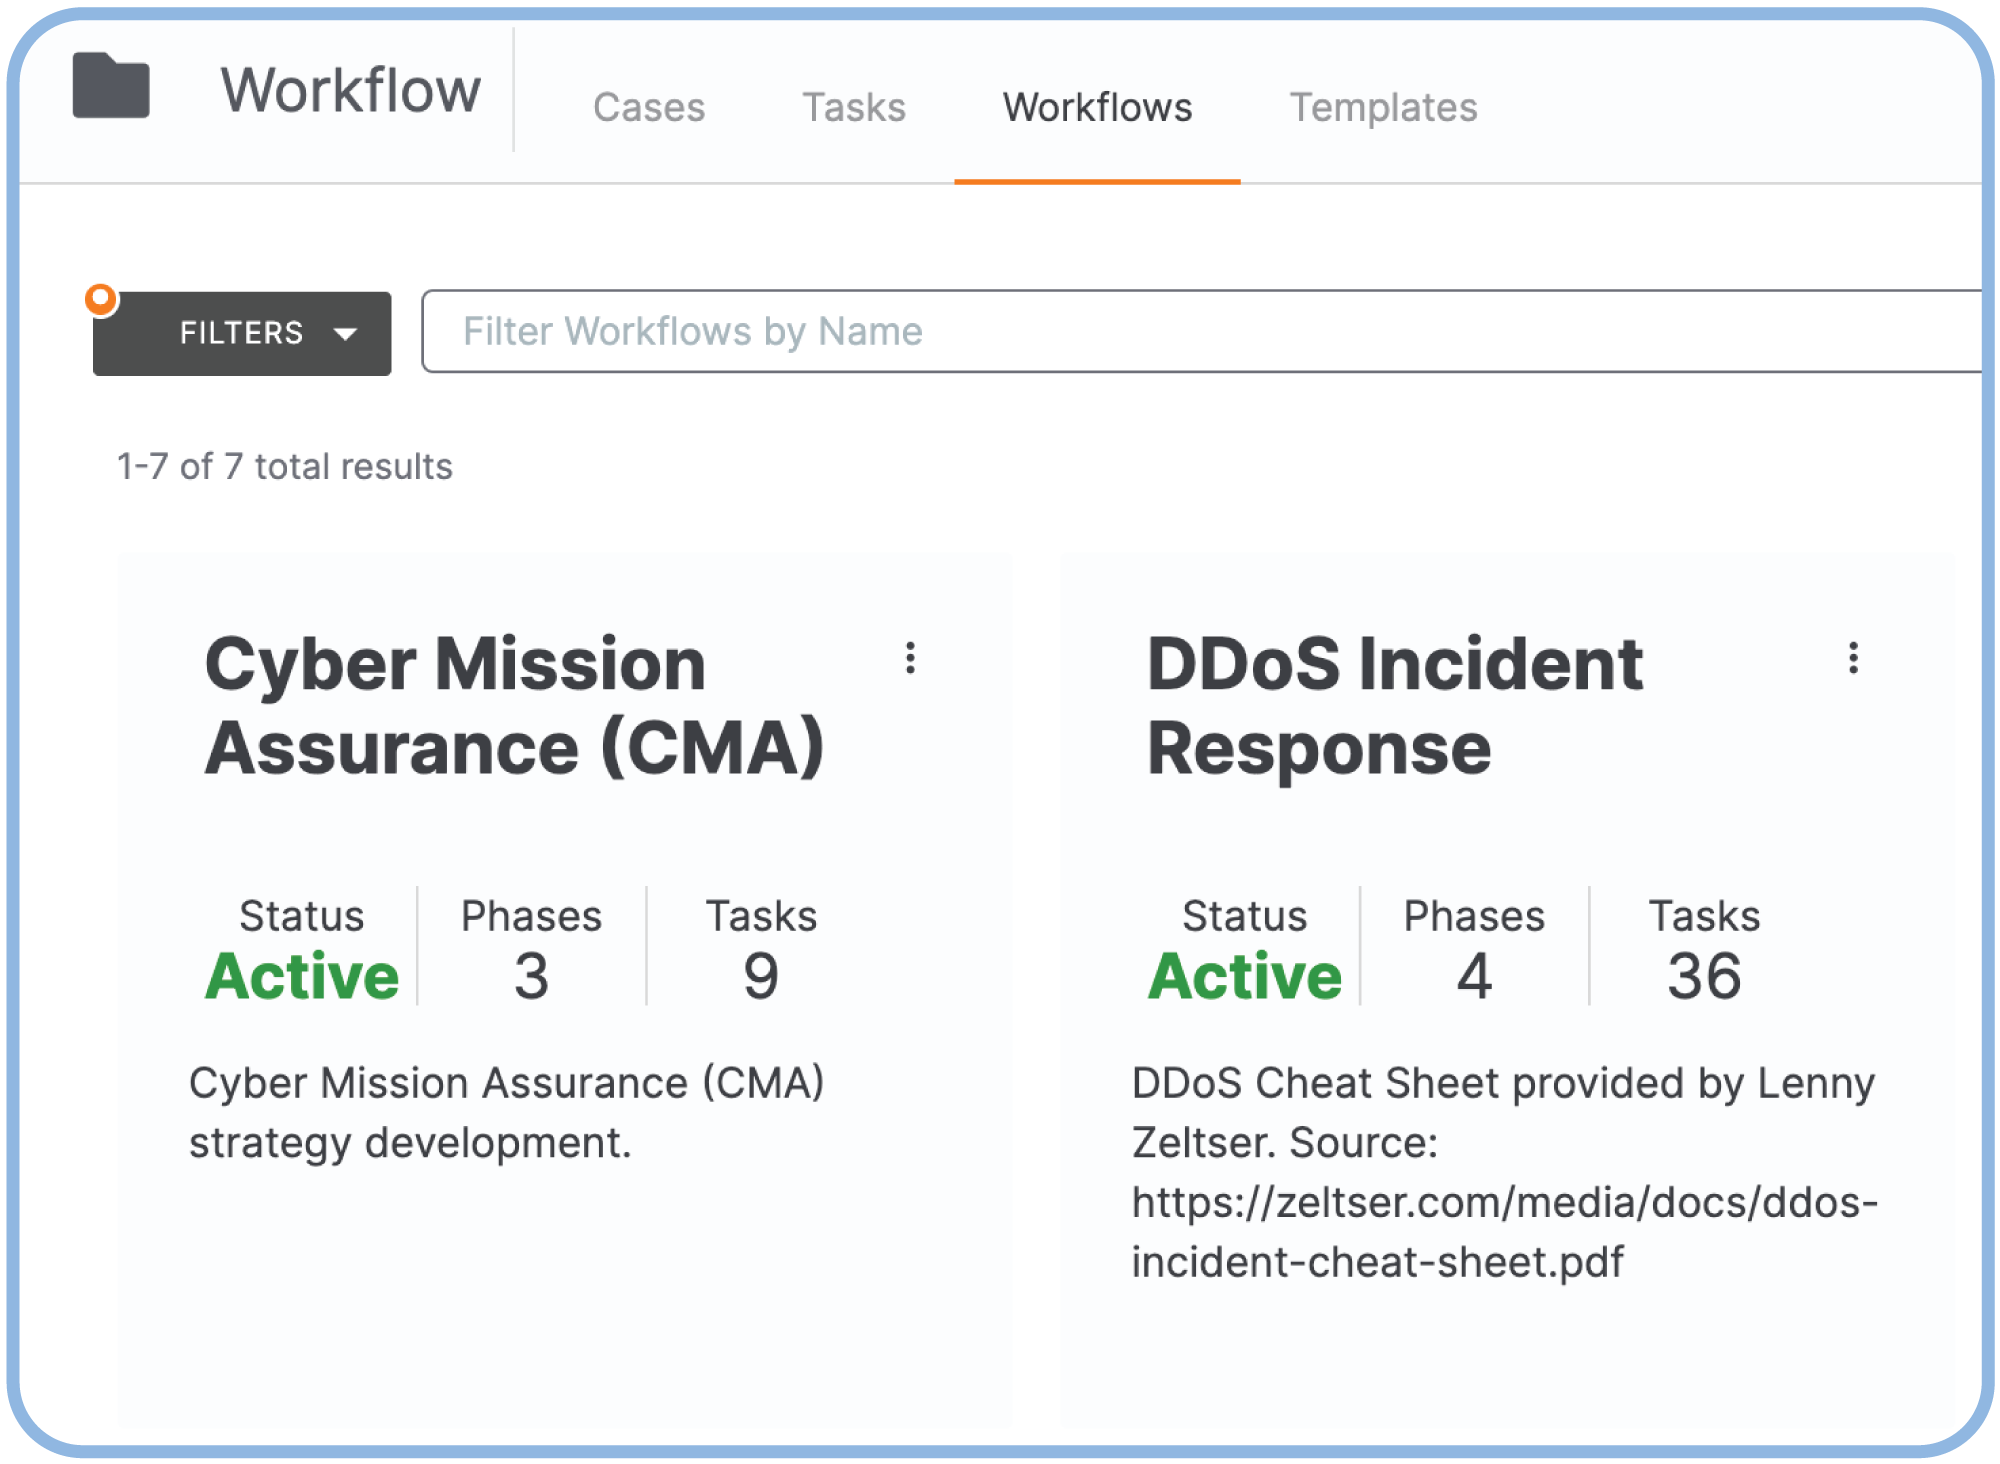 2 workflows created in the ThreatConnect Platform